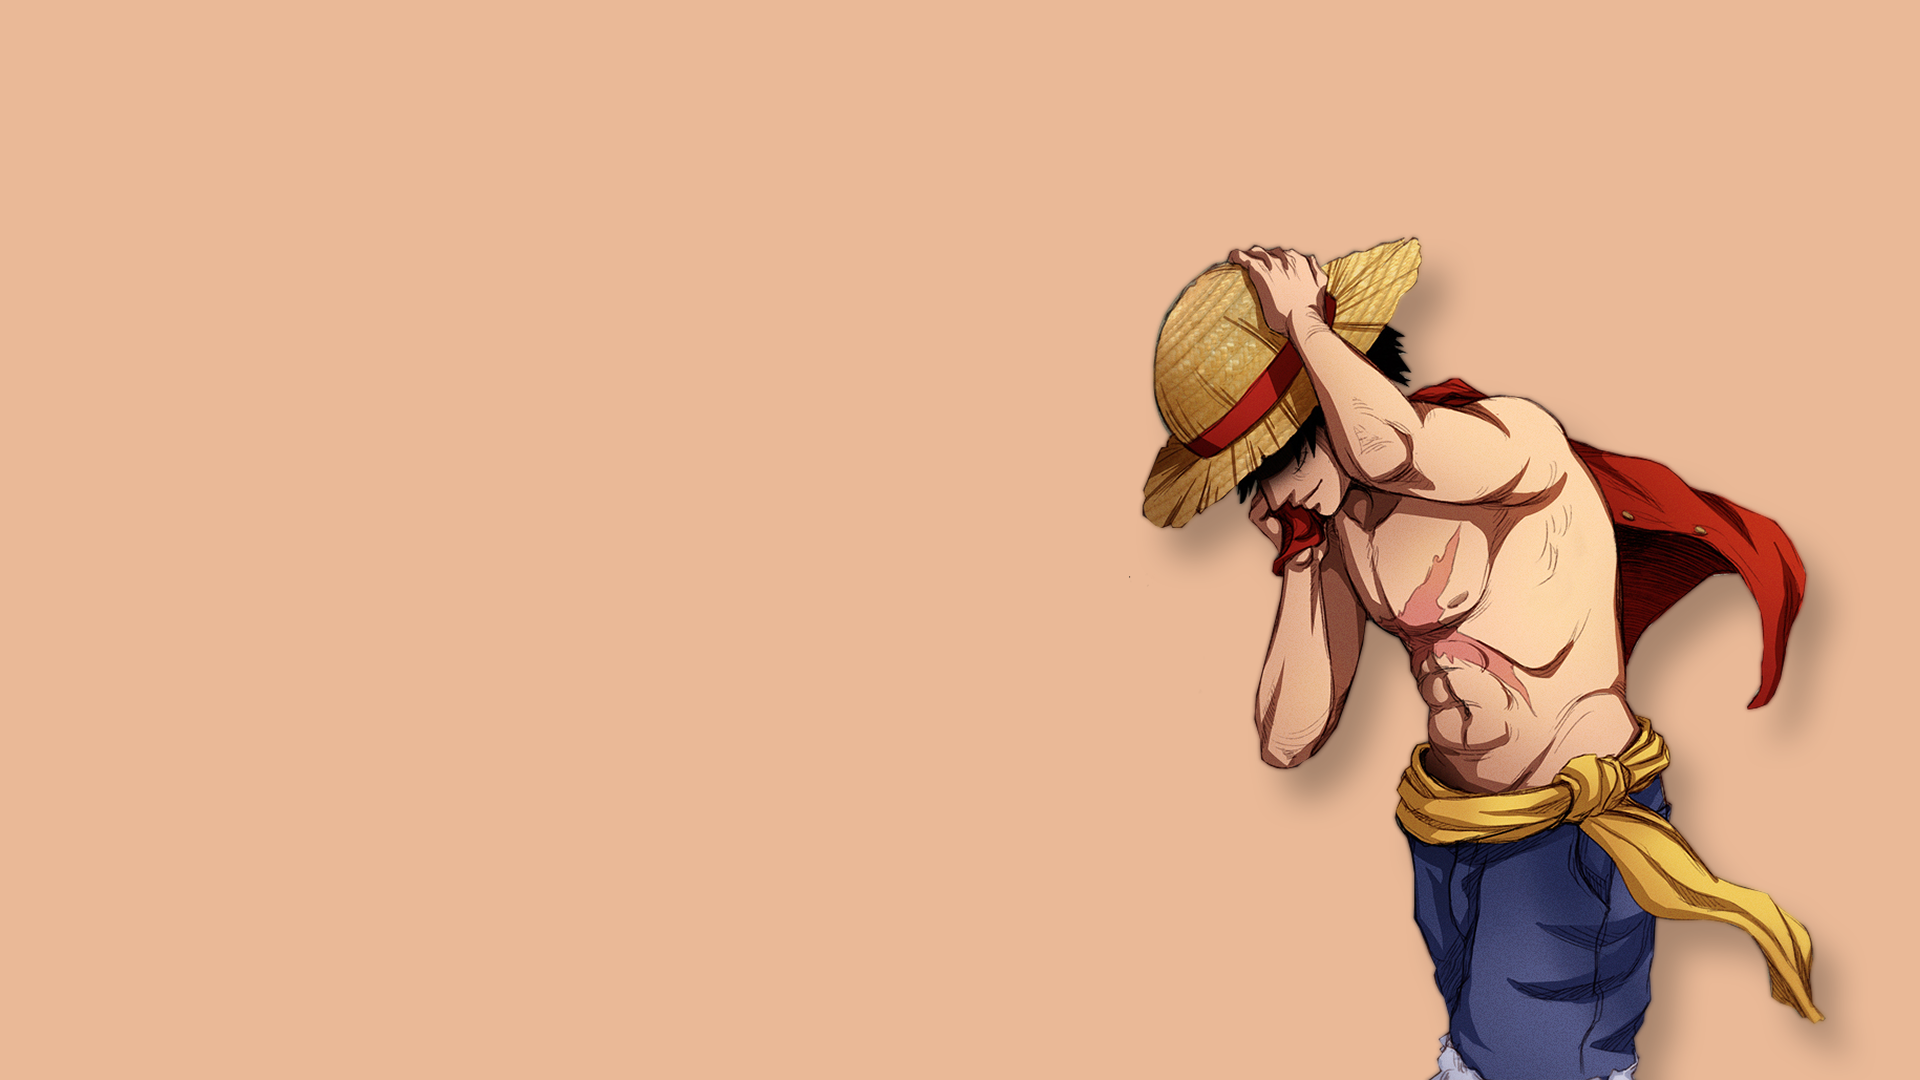 download anime one piece single link